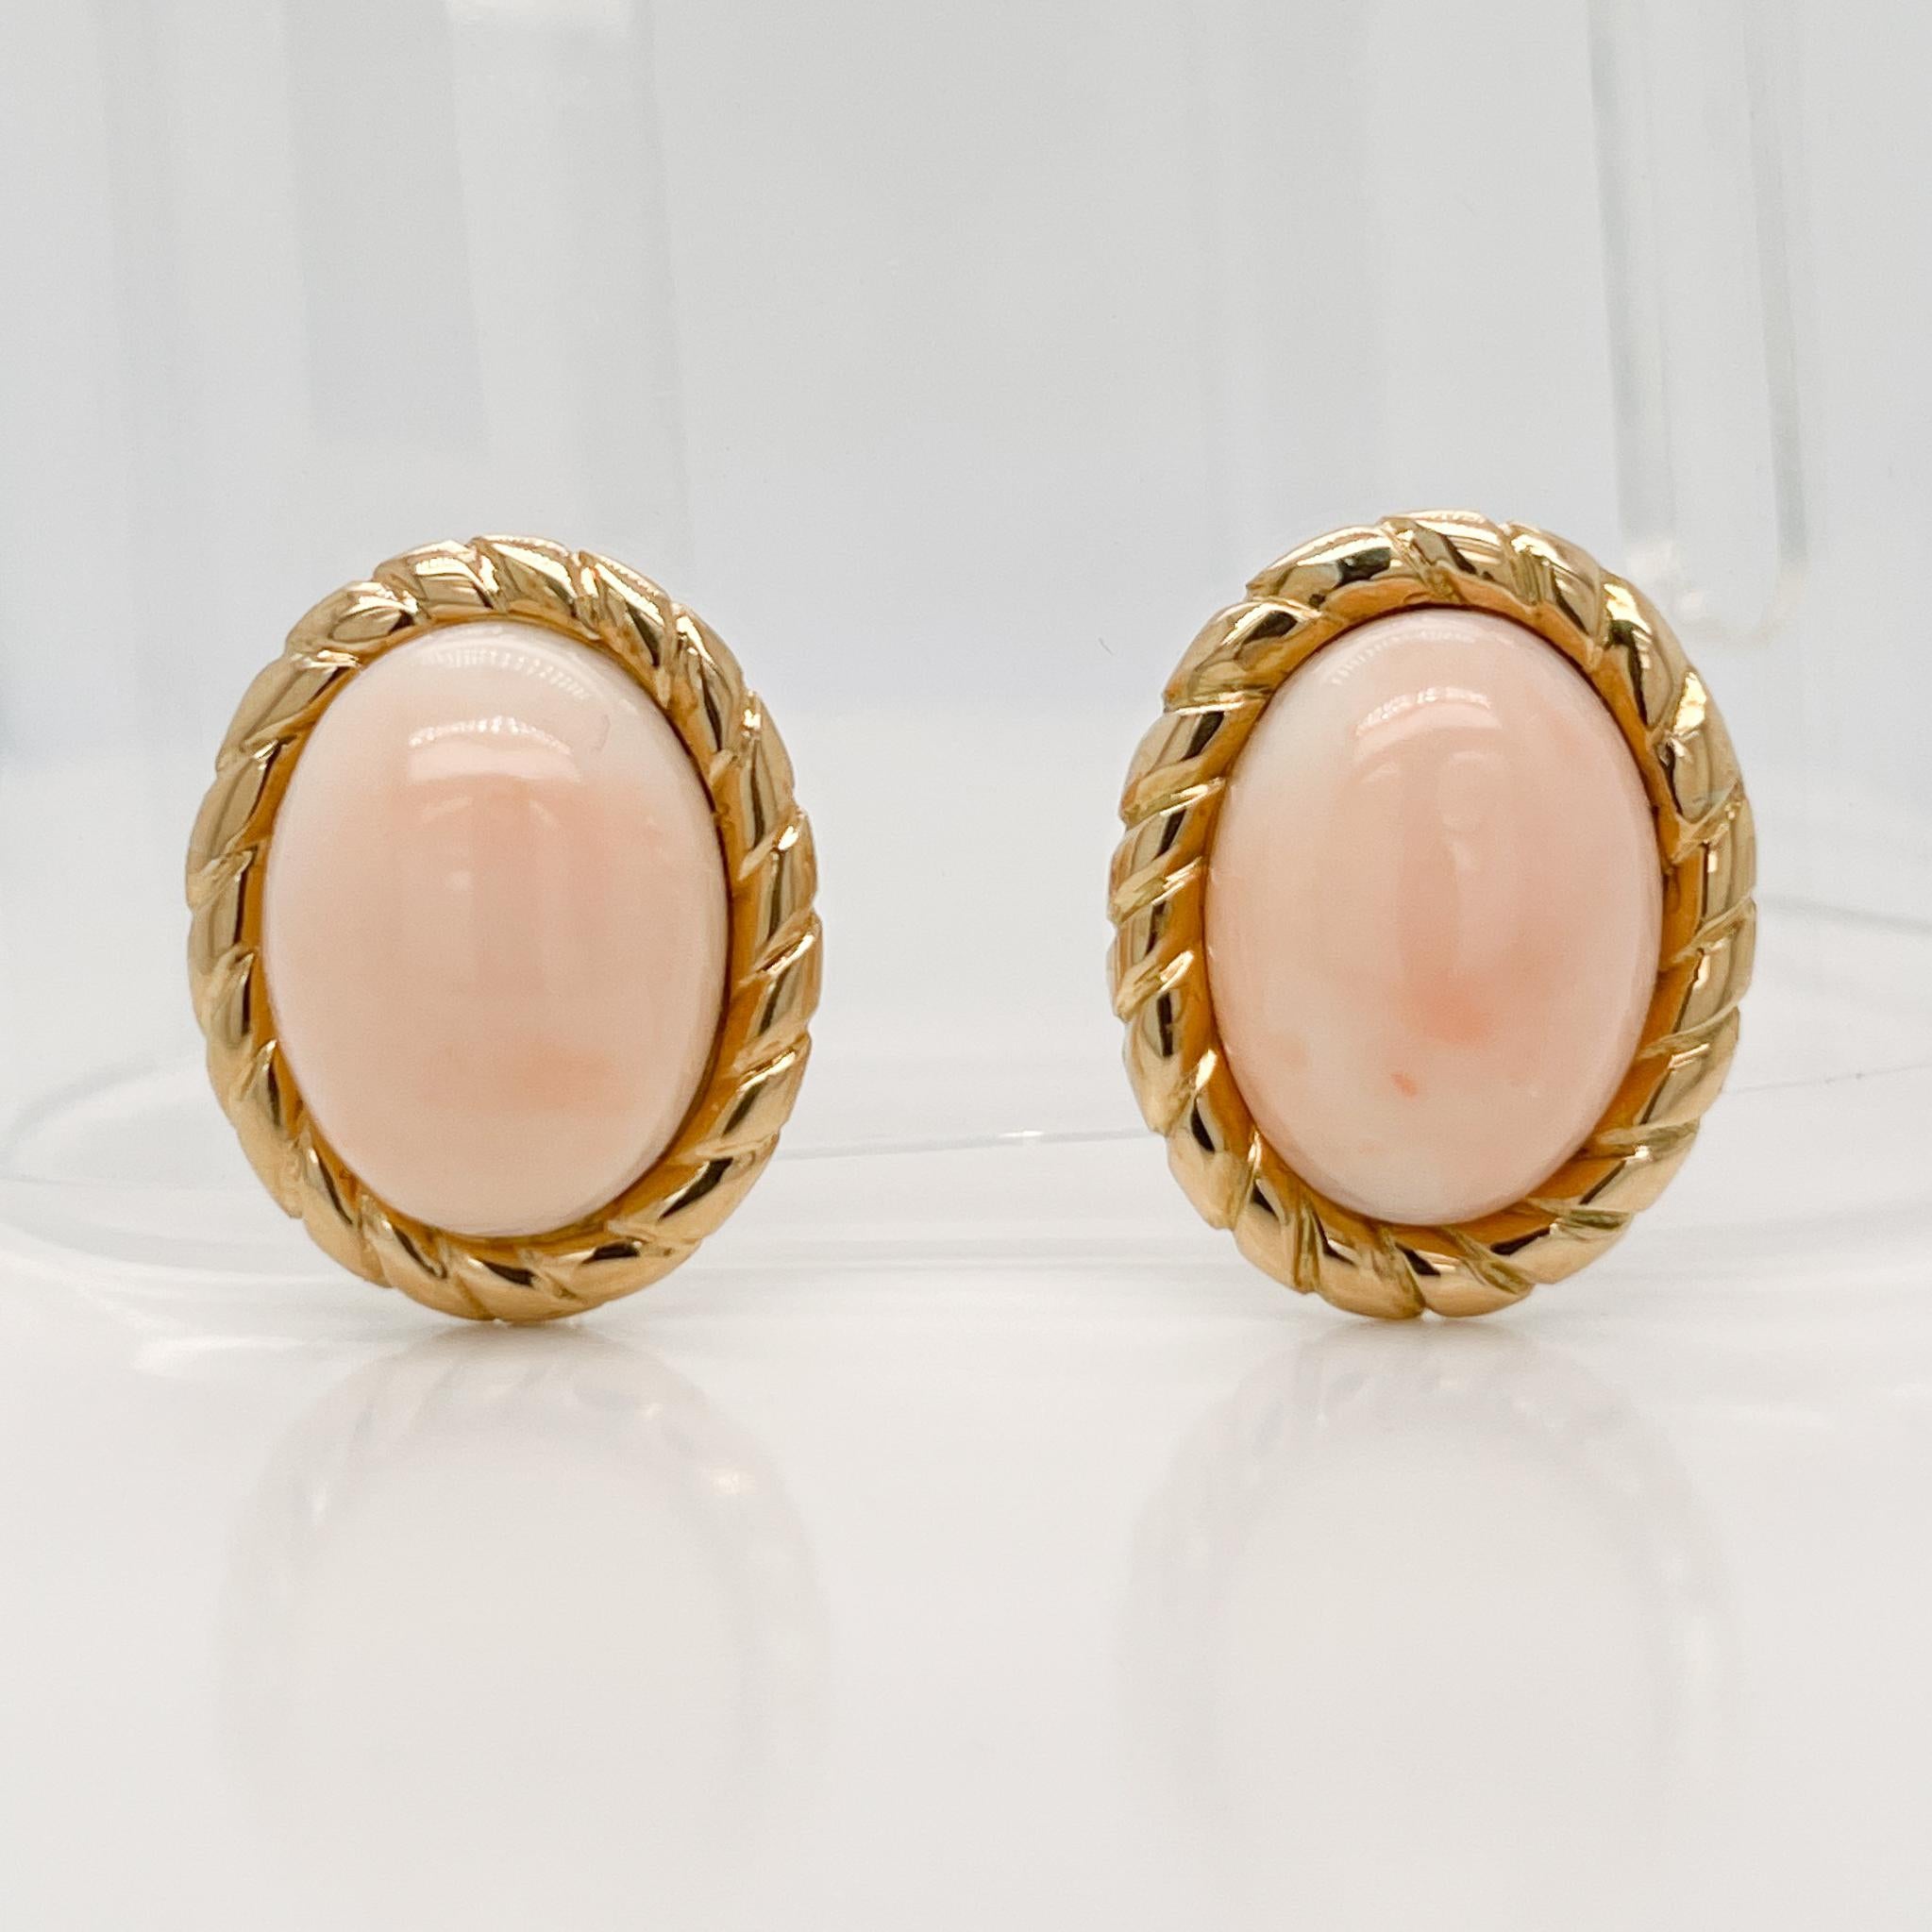 A very fine pair of Mid-Century Italian screw back earrings.

With large smooth oval cabochons framed in 18k gold rope design settings. 

With screwbacks closures to the reverse.

Simply a lovely pair of Mid-Century Italian earrings!

Date:
Mid-20th